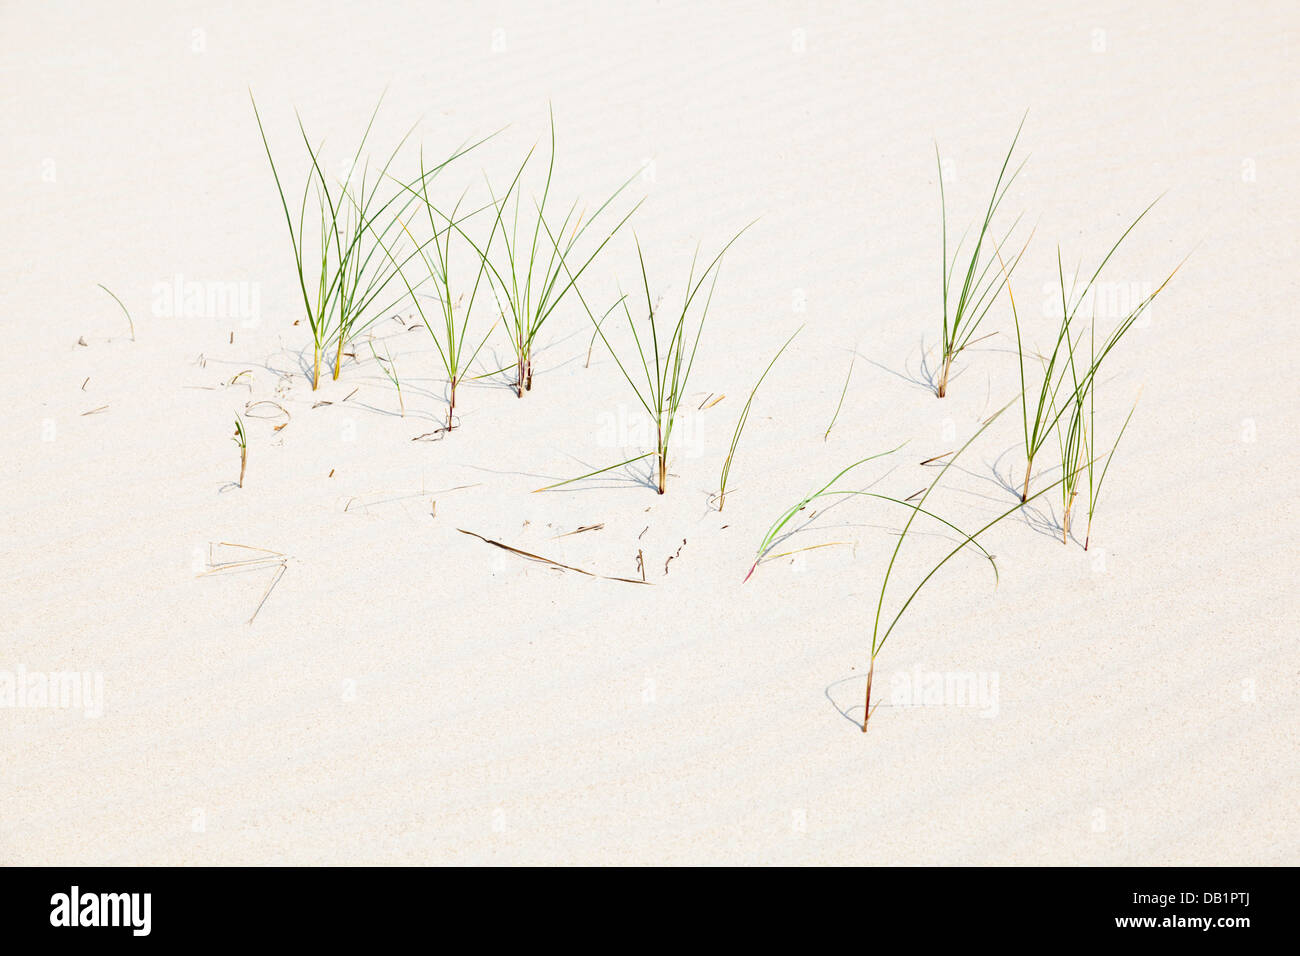 Some blades of grass growing on a sand dune at the North Sea in Norderney, Germany. Stock Photo